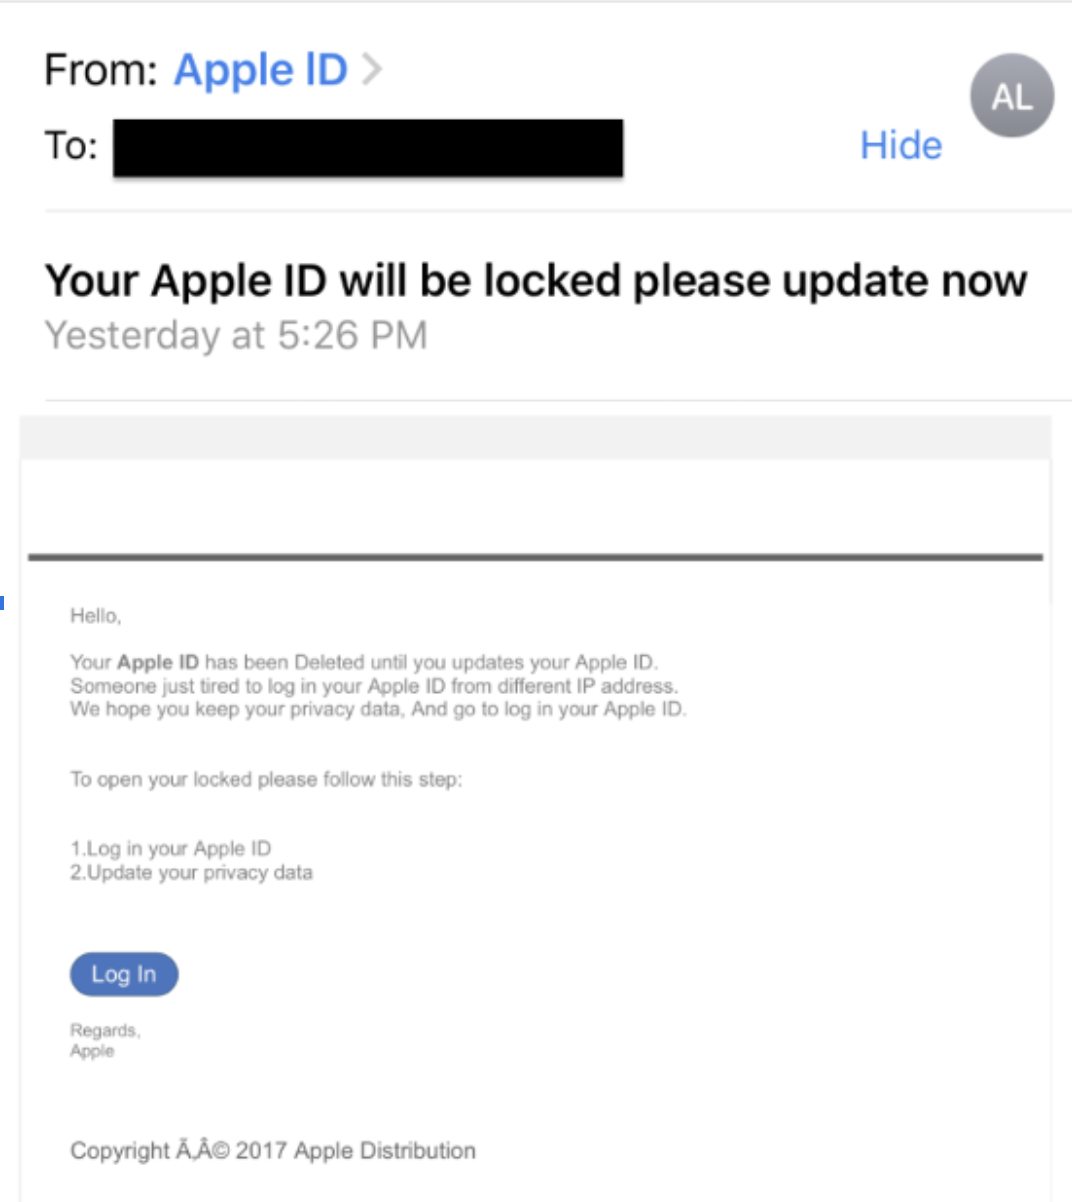 example phishing email from apple